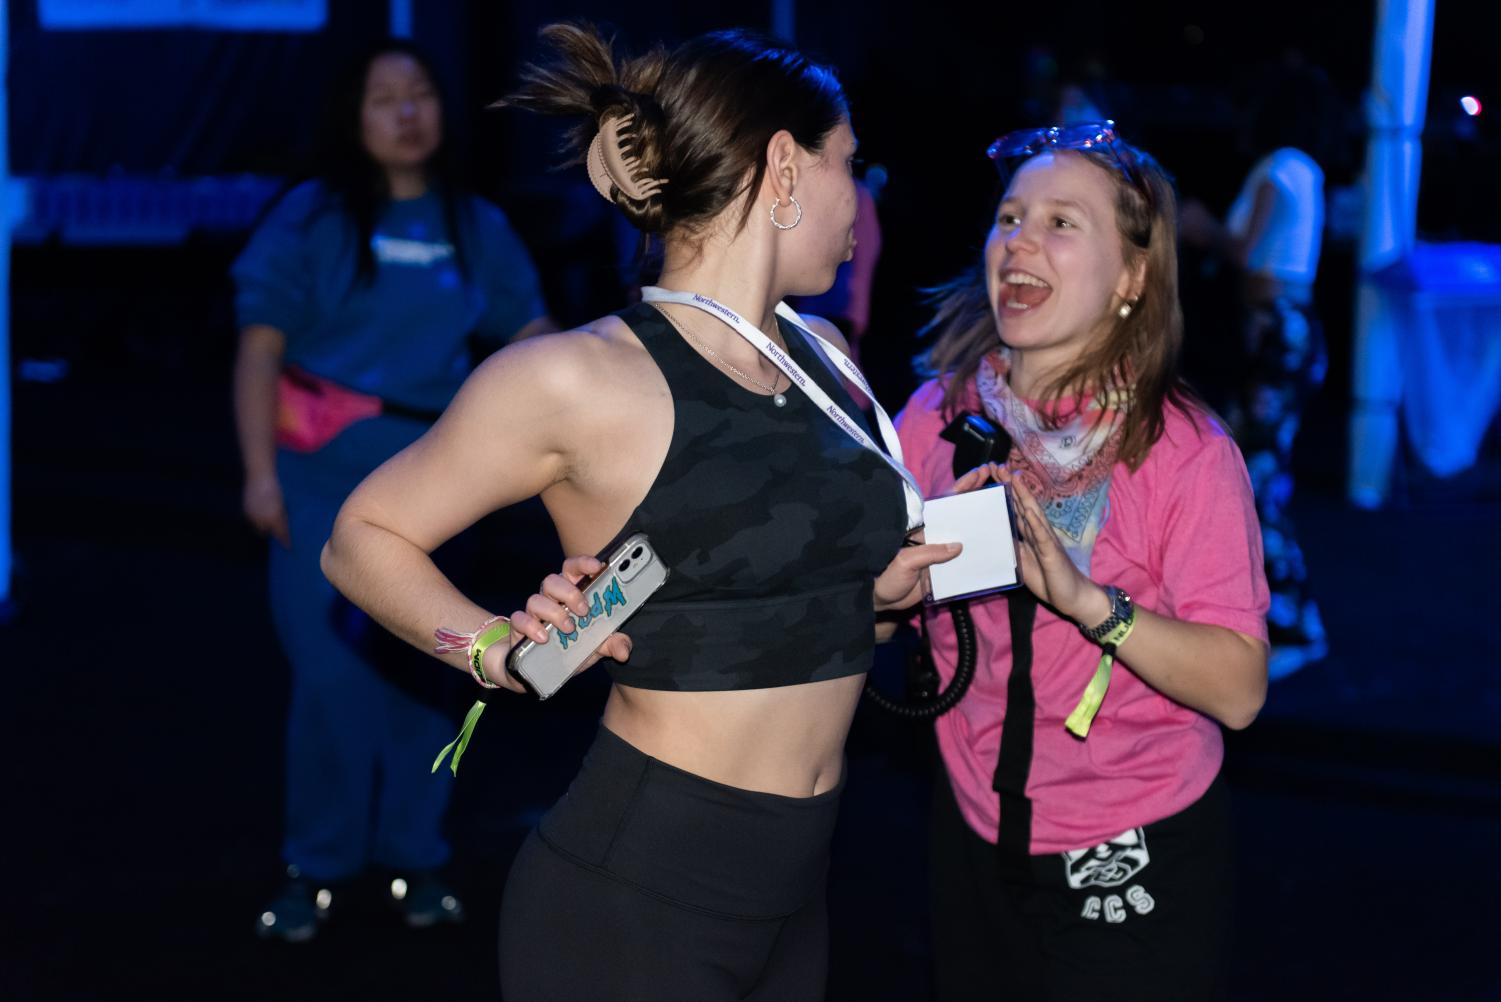 A person in a black sports bra looks back at a person in a pink shirt who is smiling.